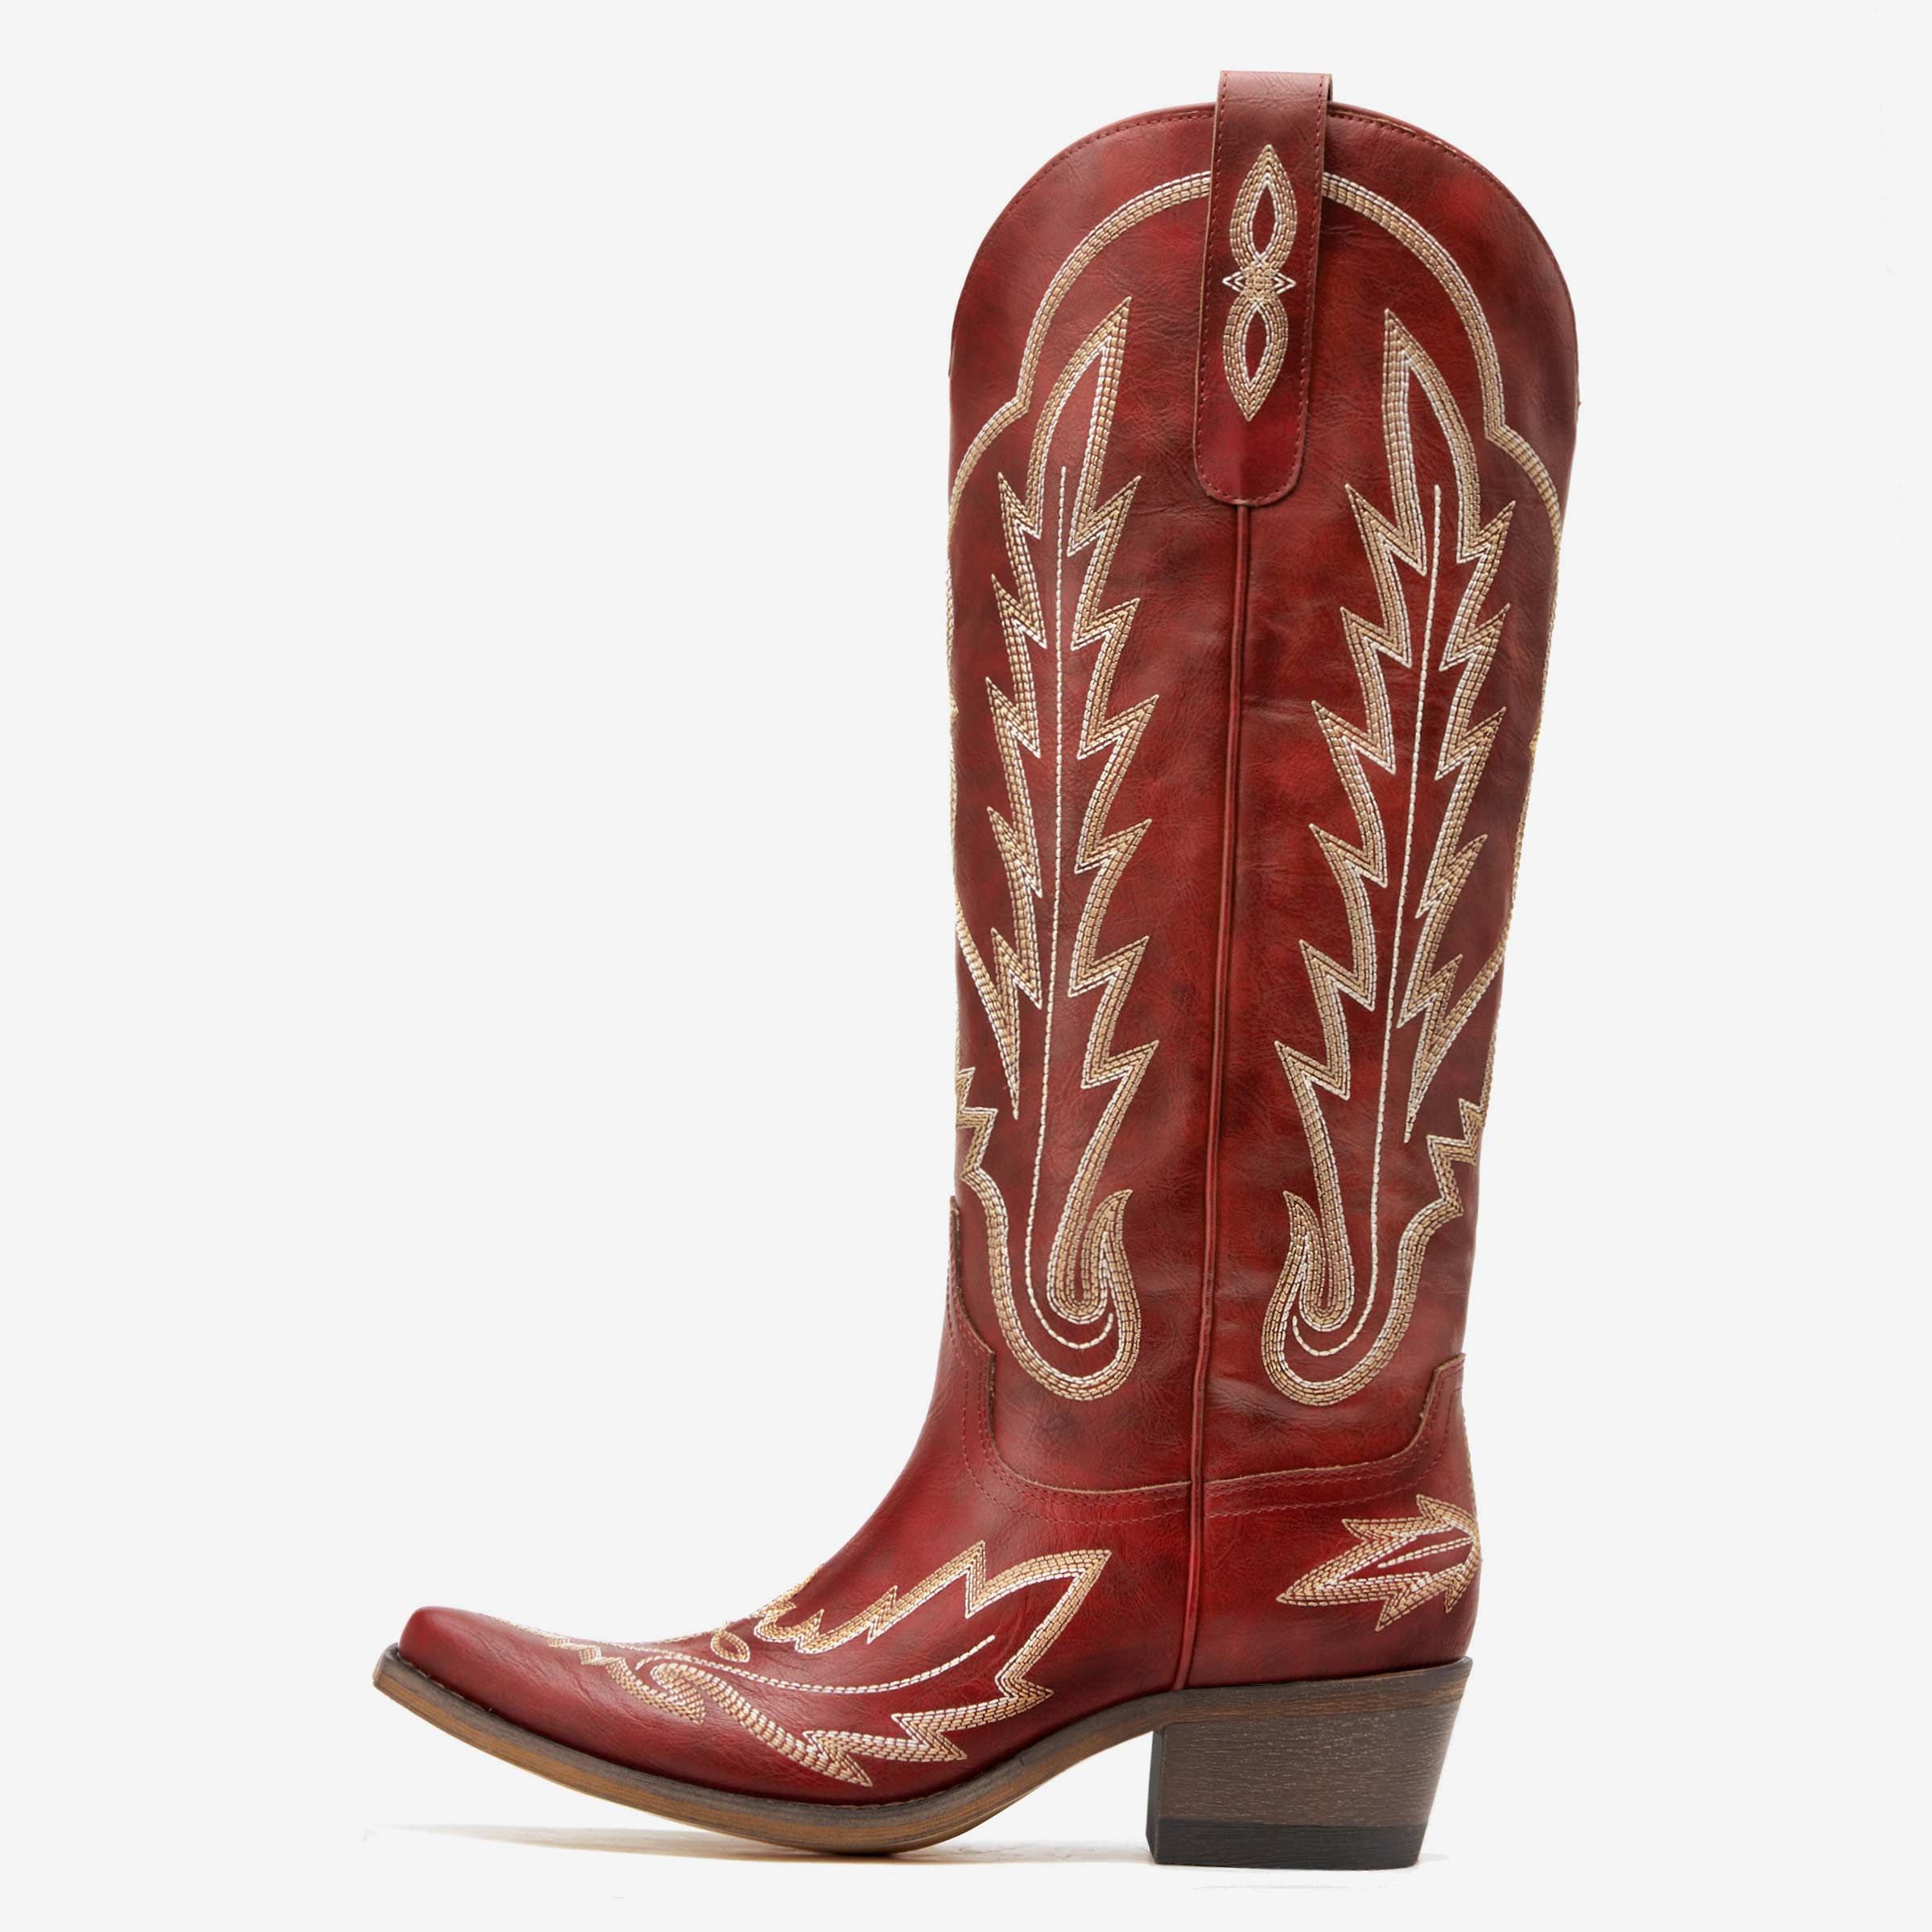 REDTOP Women's Western Cowgirl Boots Red Embroidered Vintage Boots | REDTOP